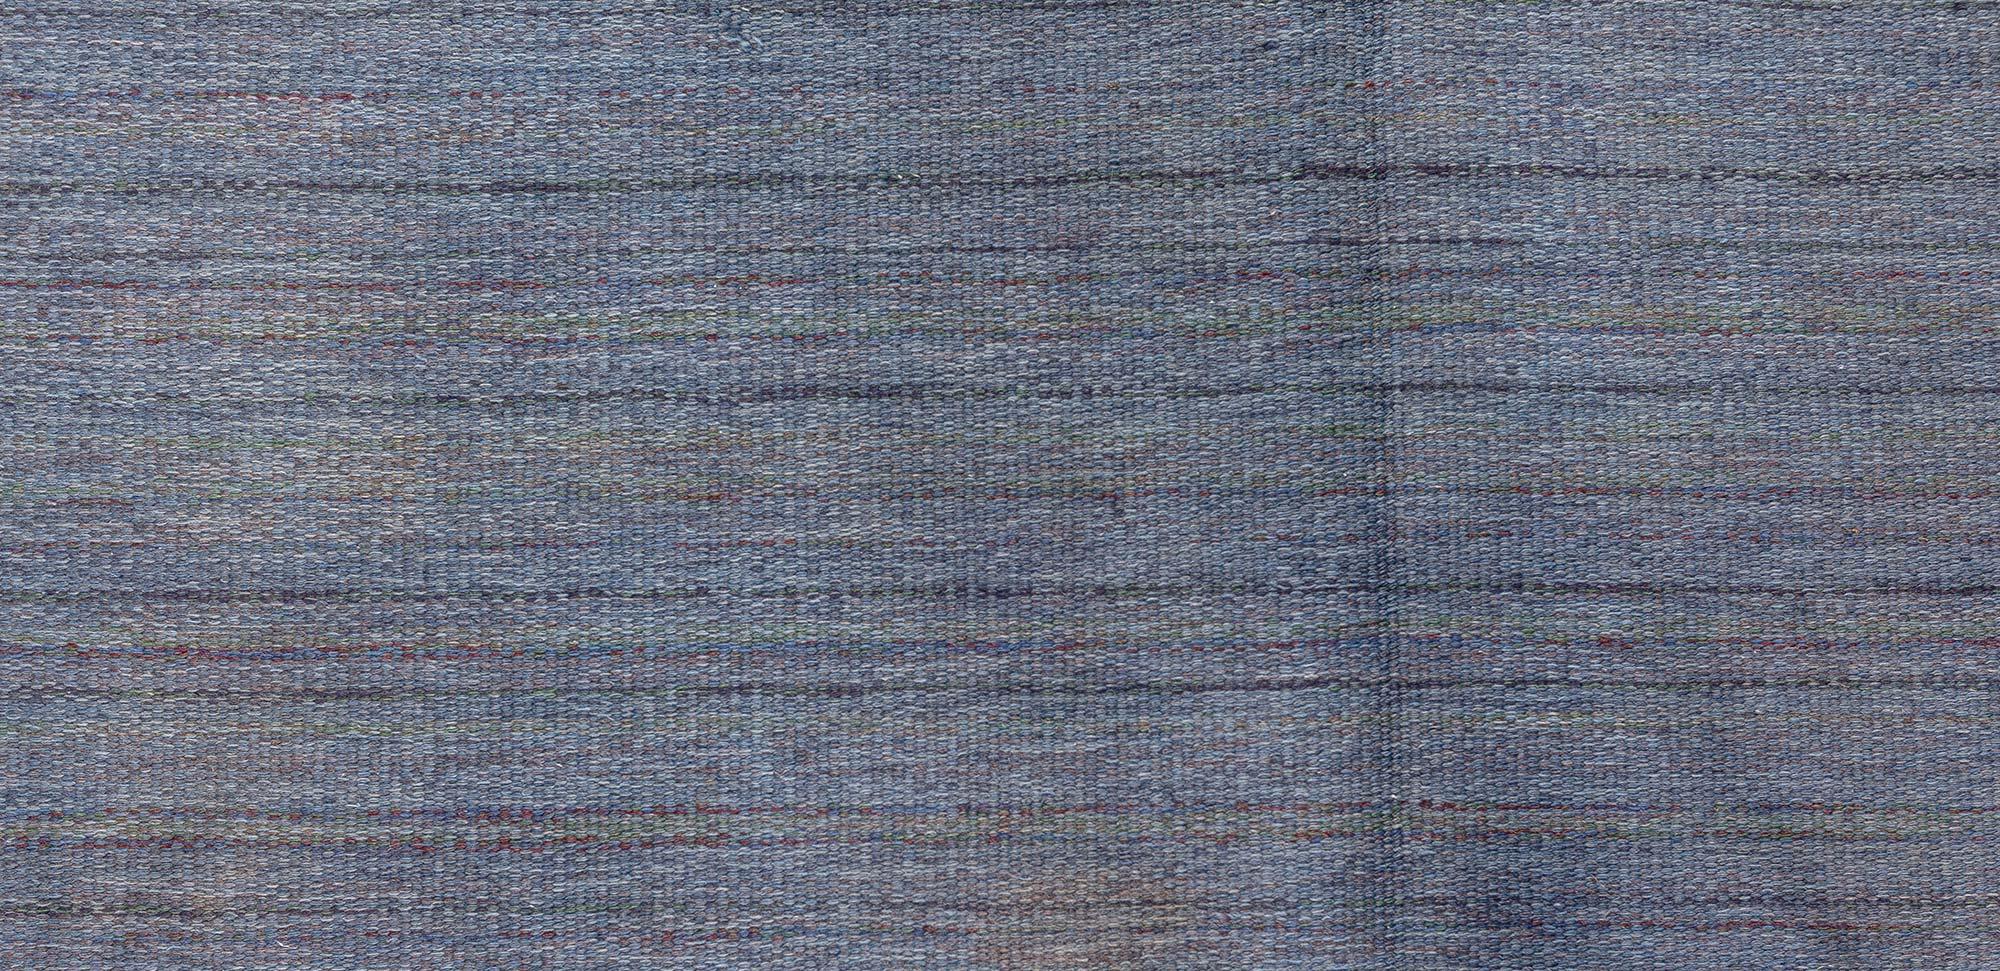 Hand-Woven Vintage Swedish Beige Blue Gray Flat Woven Rug For Sale